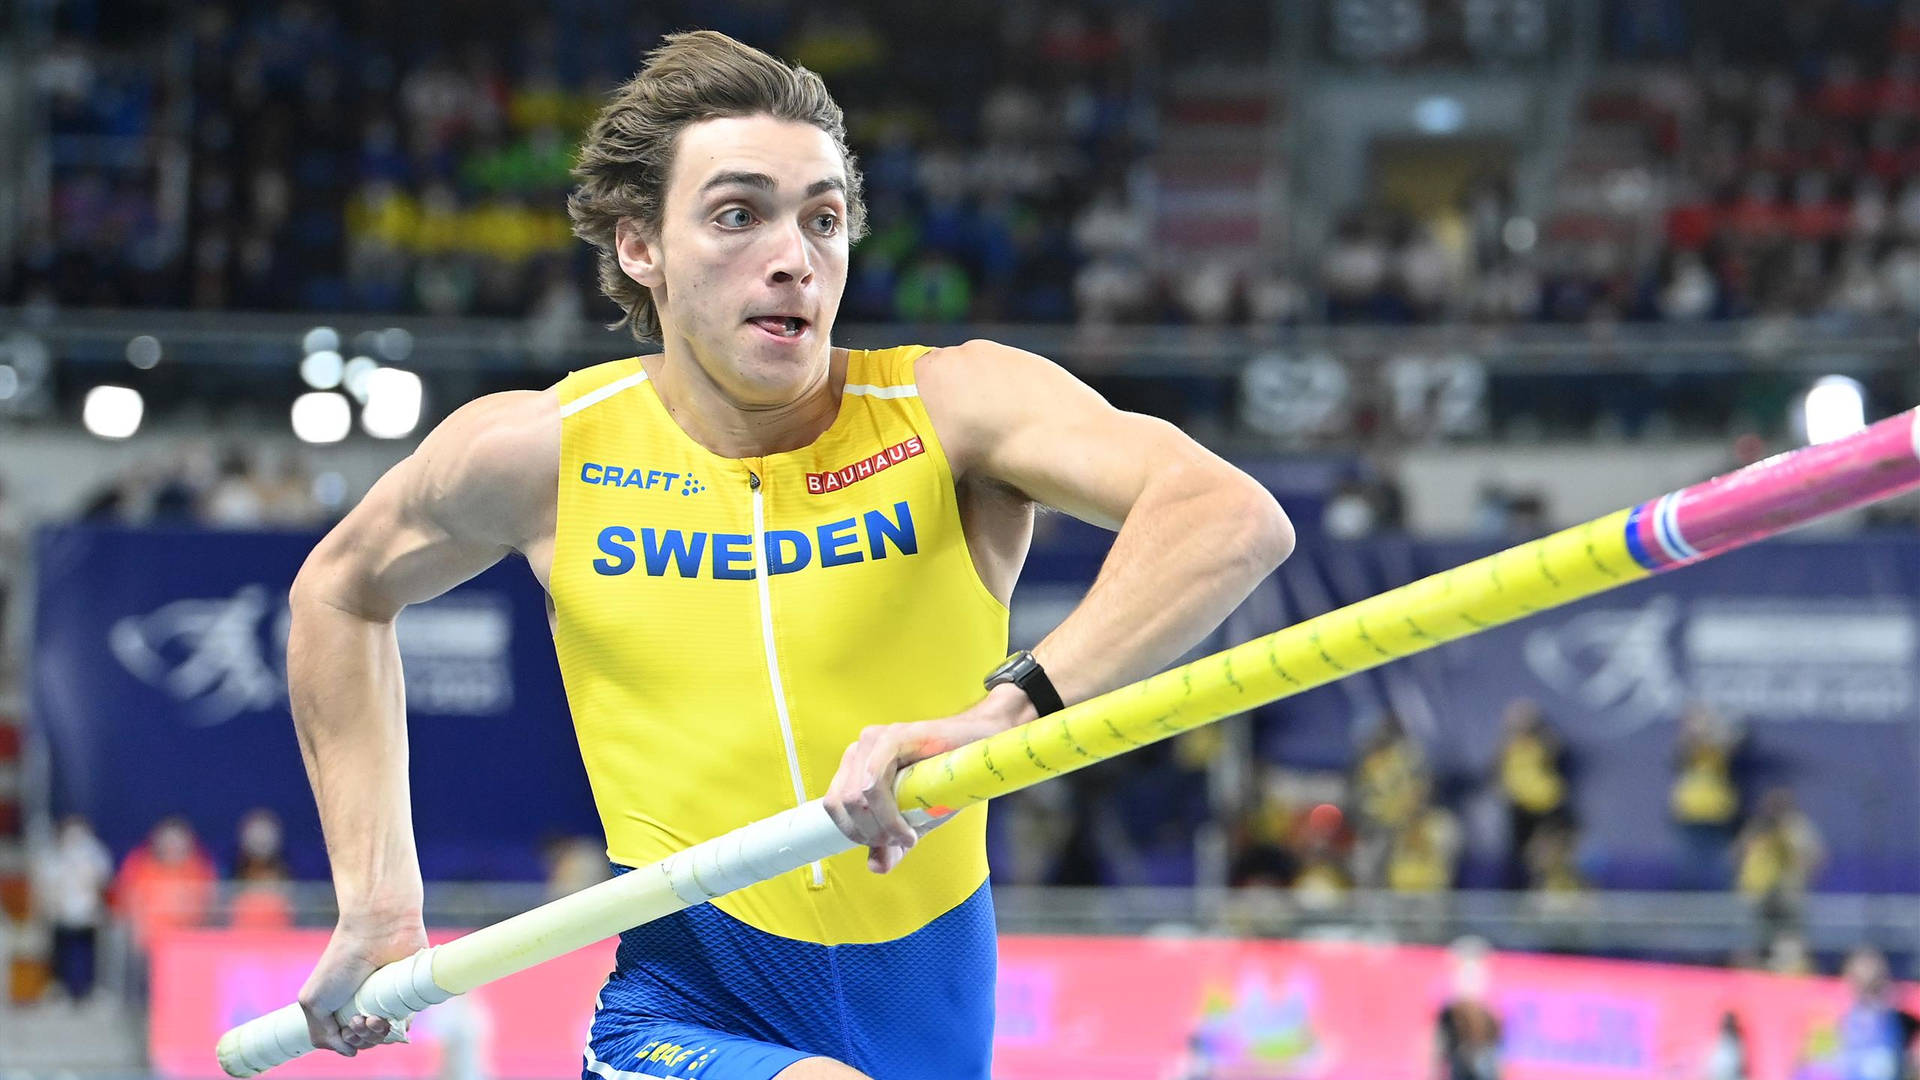 Armand Duplantis In Action In A Pole Vault Game